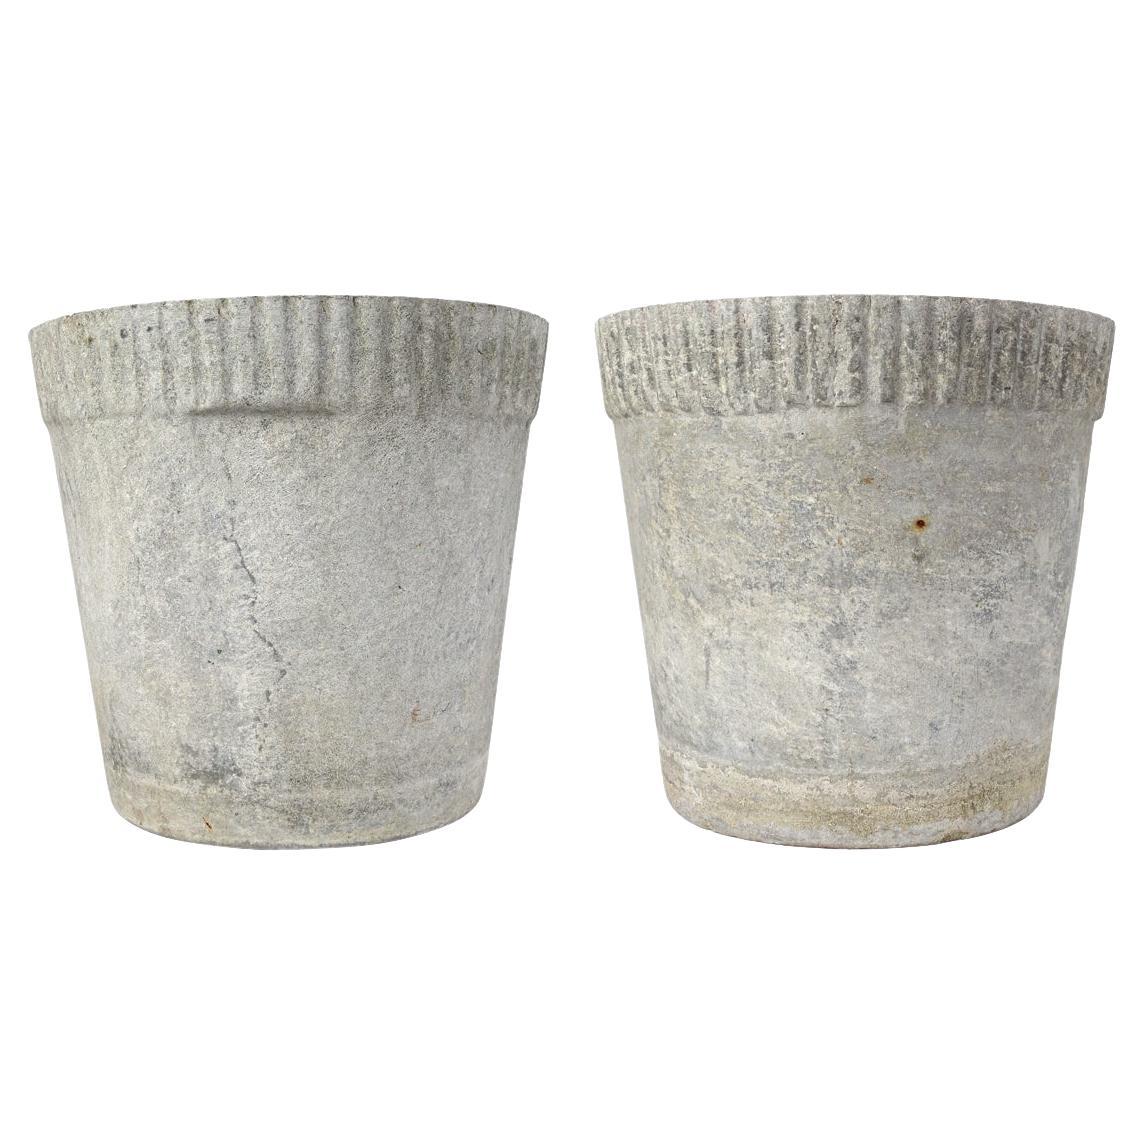 Set of 2 Planters in Flower Pot Shape with Ribbed Rims by Willy Guhl for Eternit